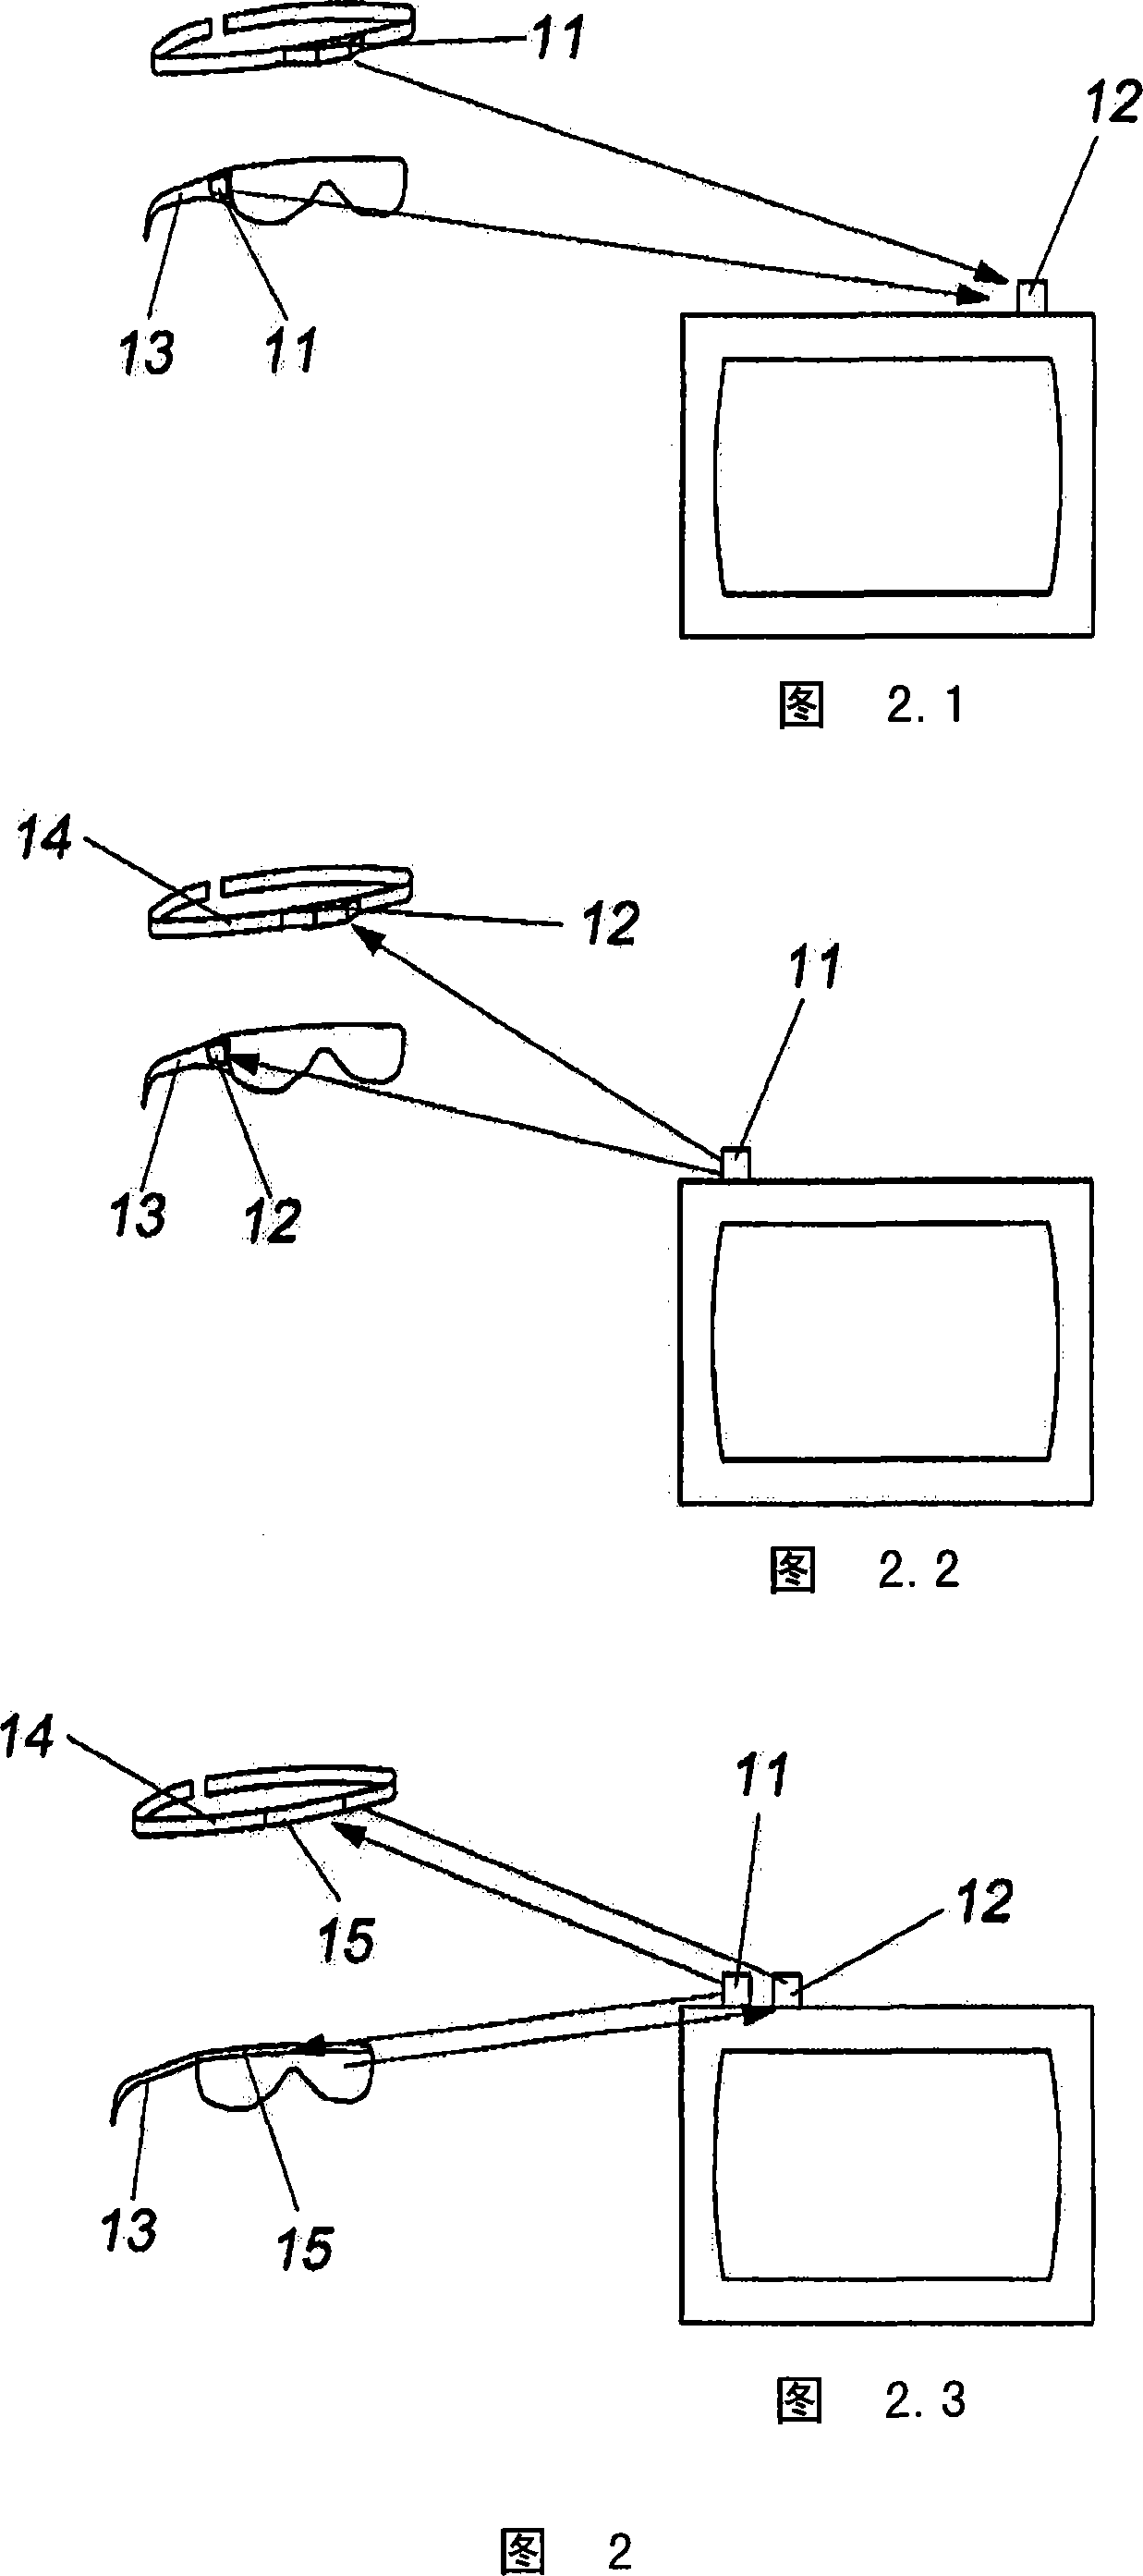 Automatic control of a medical device